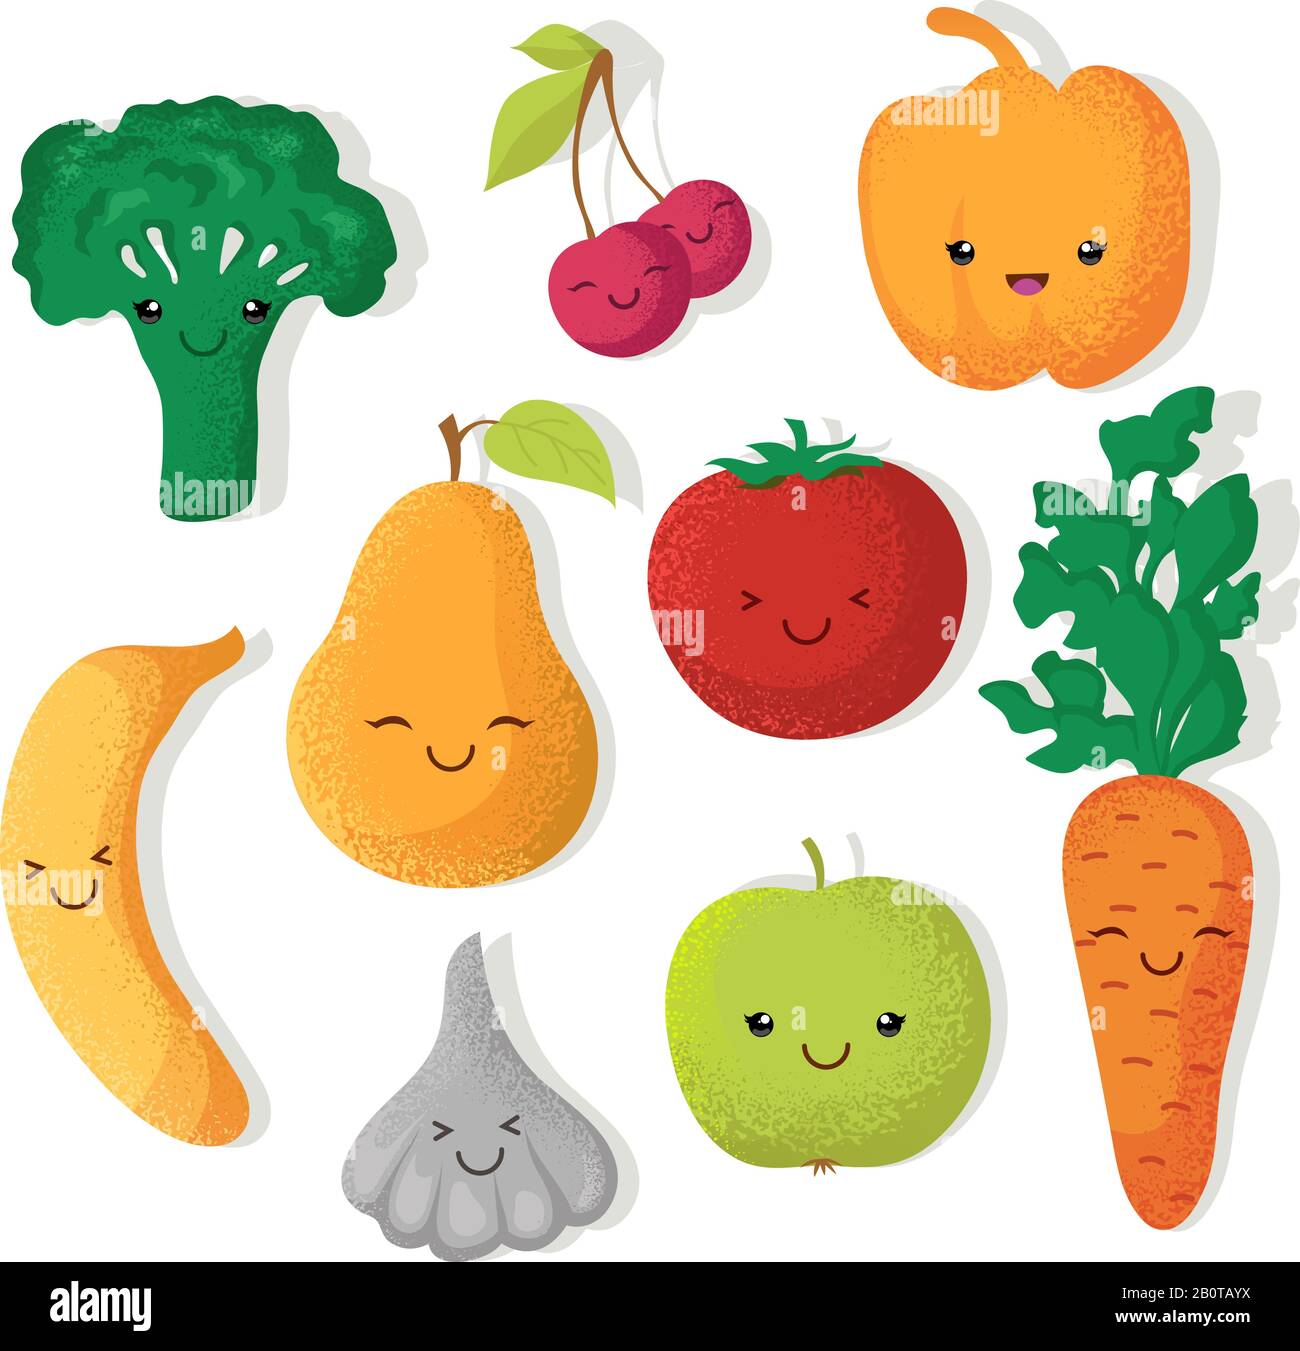 Cartoon funny fruits and vegetables vector characters. Vegetable and fruits, tomato and pear fruit illustration Stock Vector